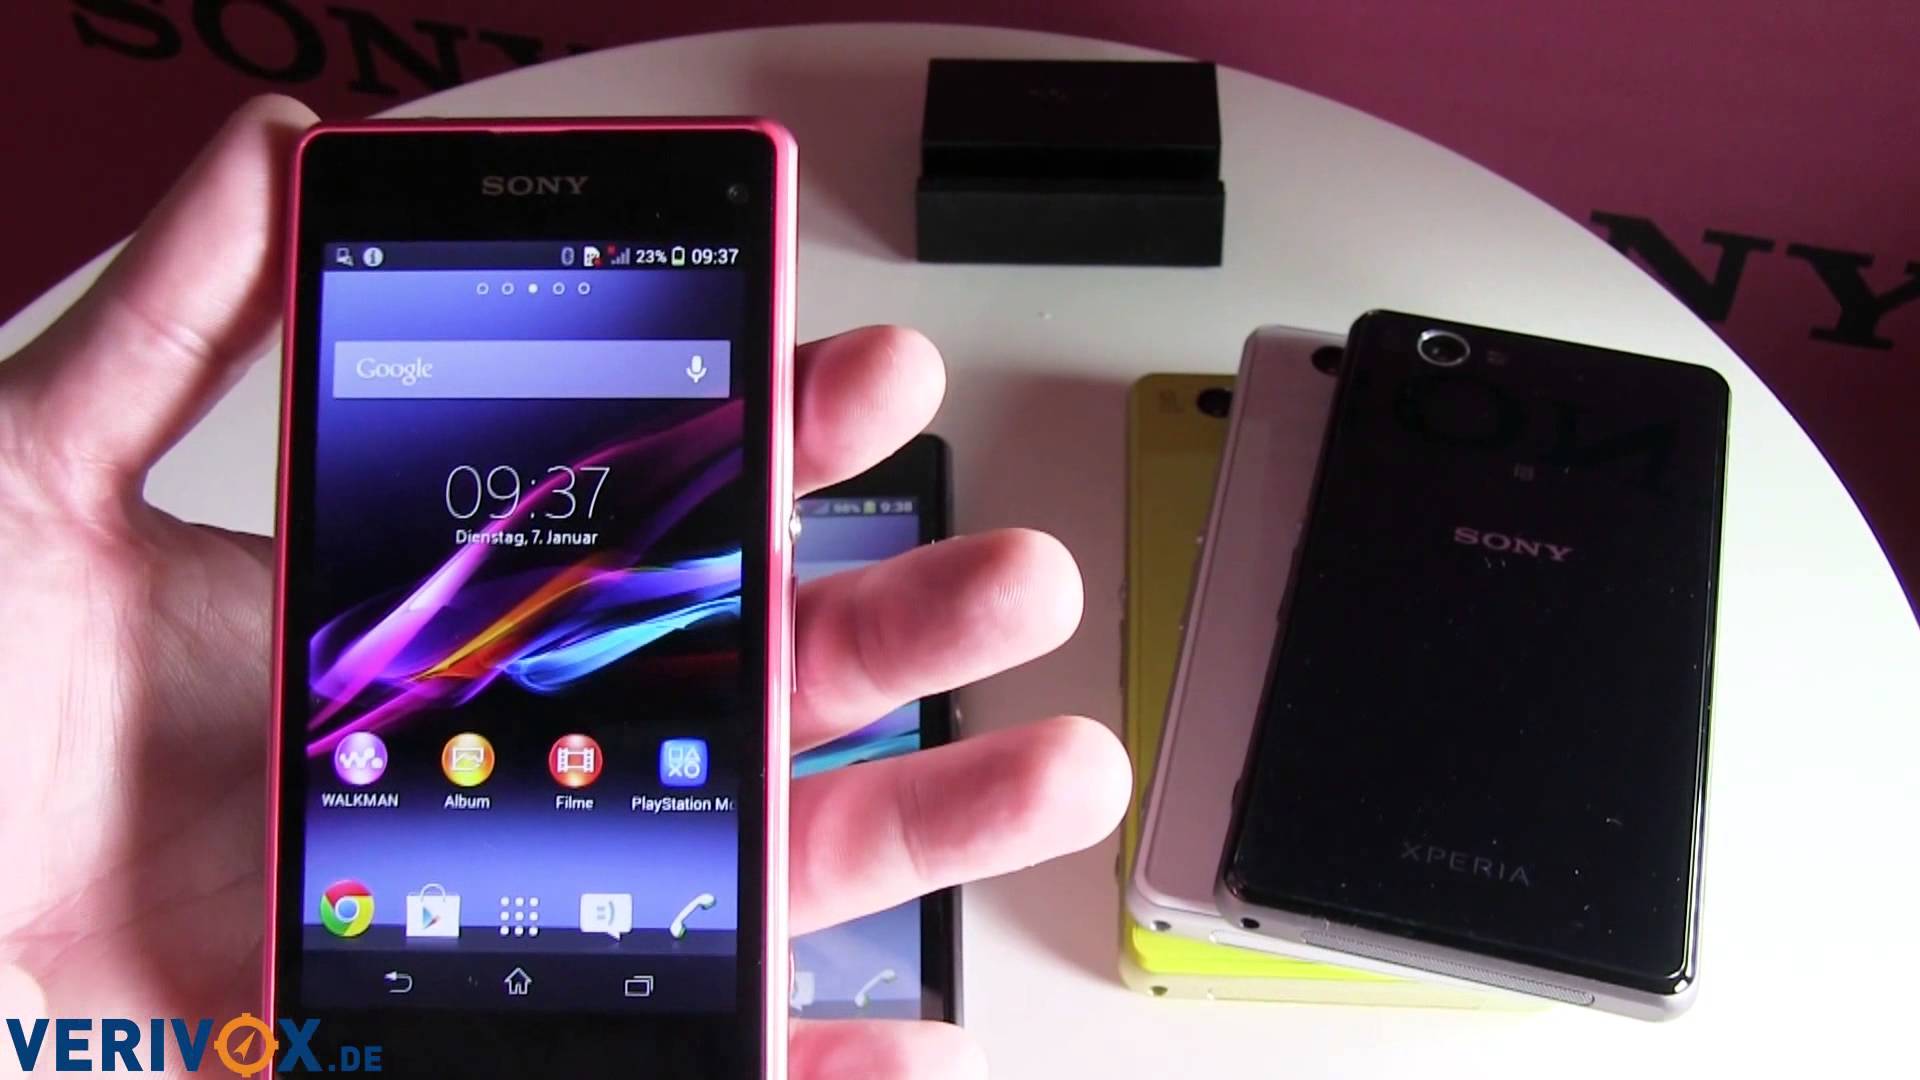 Sony Xperia Z1 Compact 20.7 MP Camera Features Look